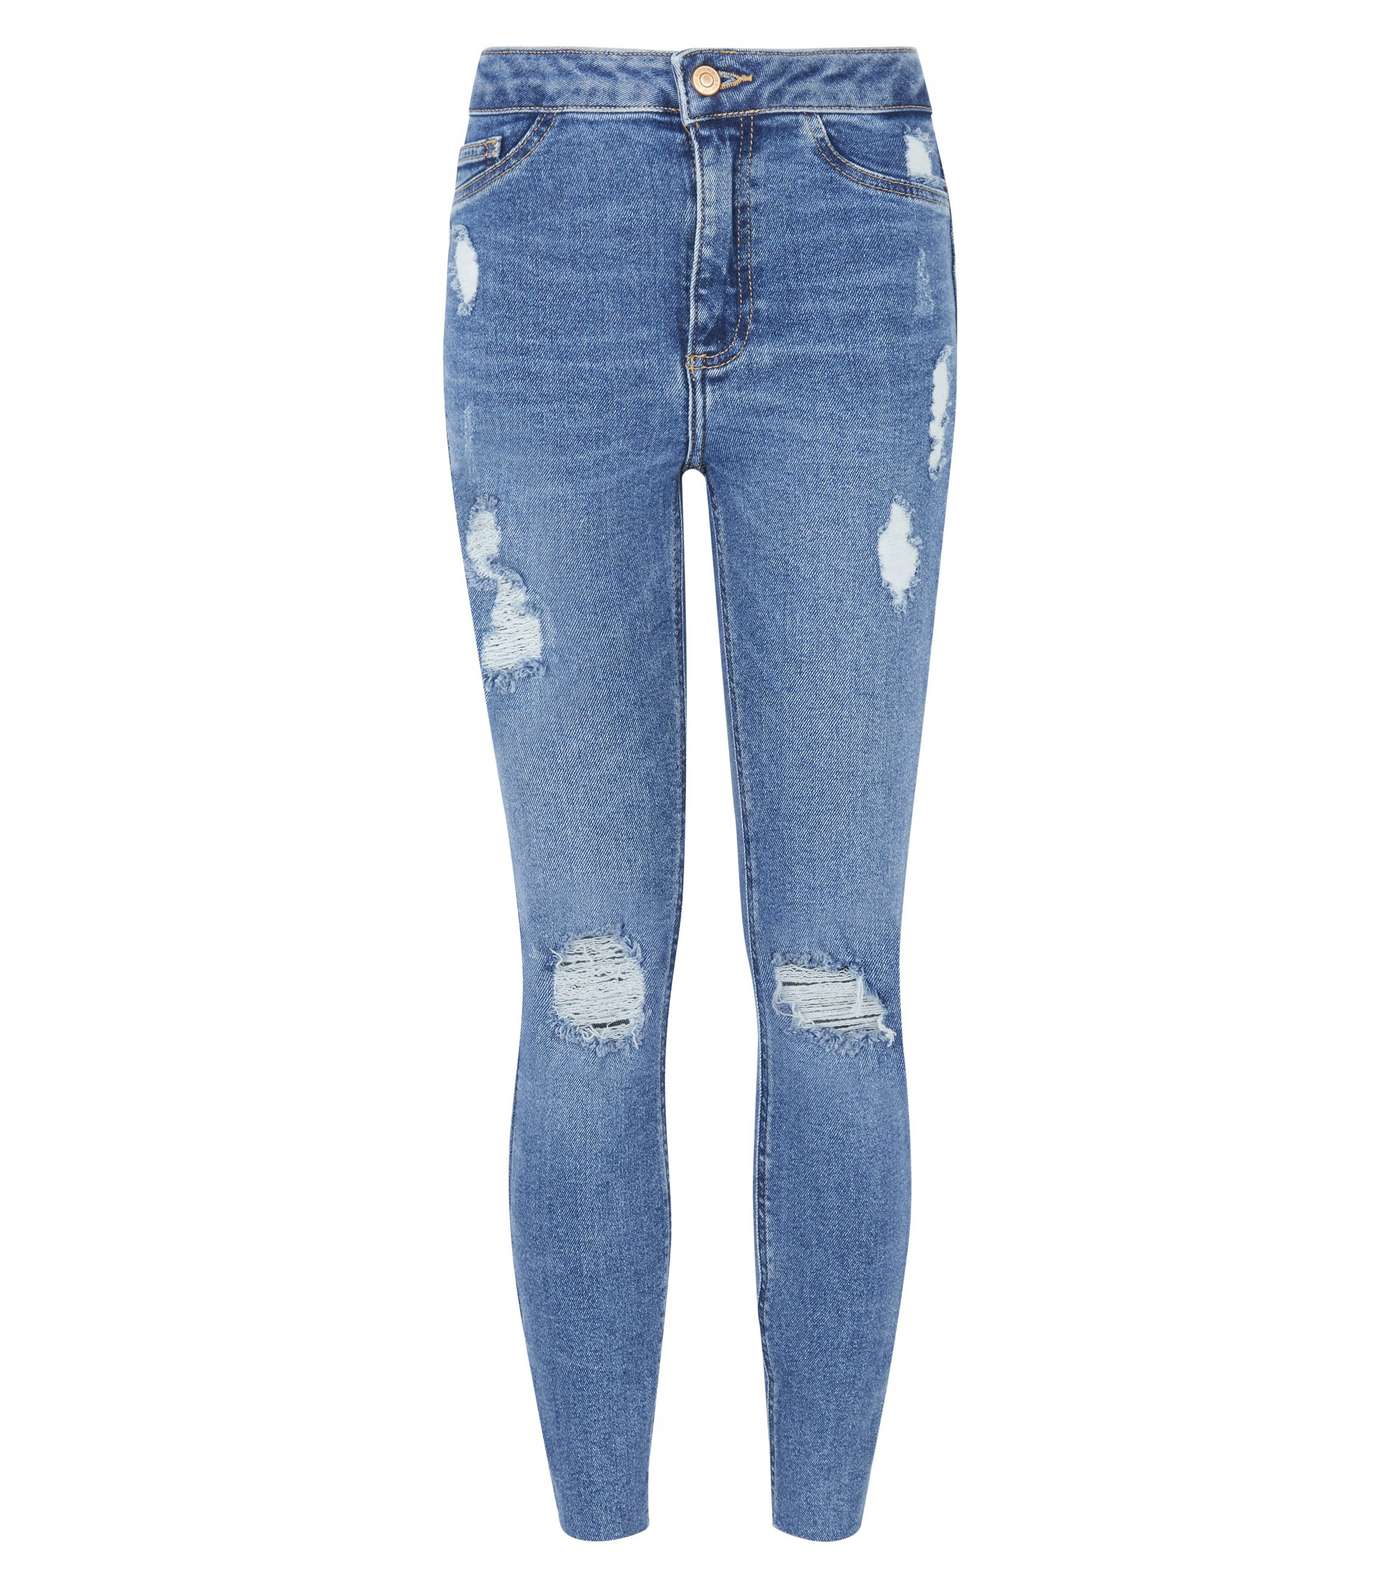 Girls Mid Blue Ripped High Waist Super Skinny Jeans Image 4